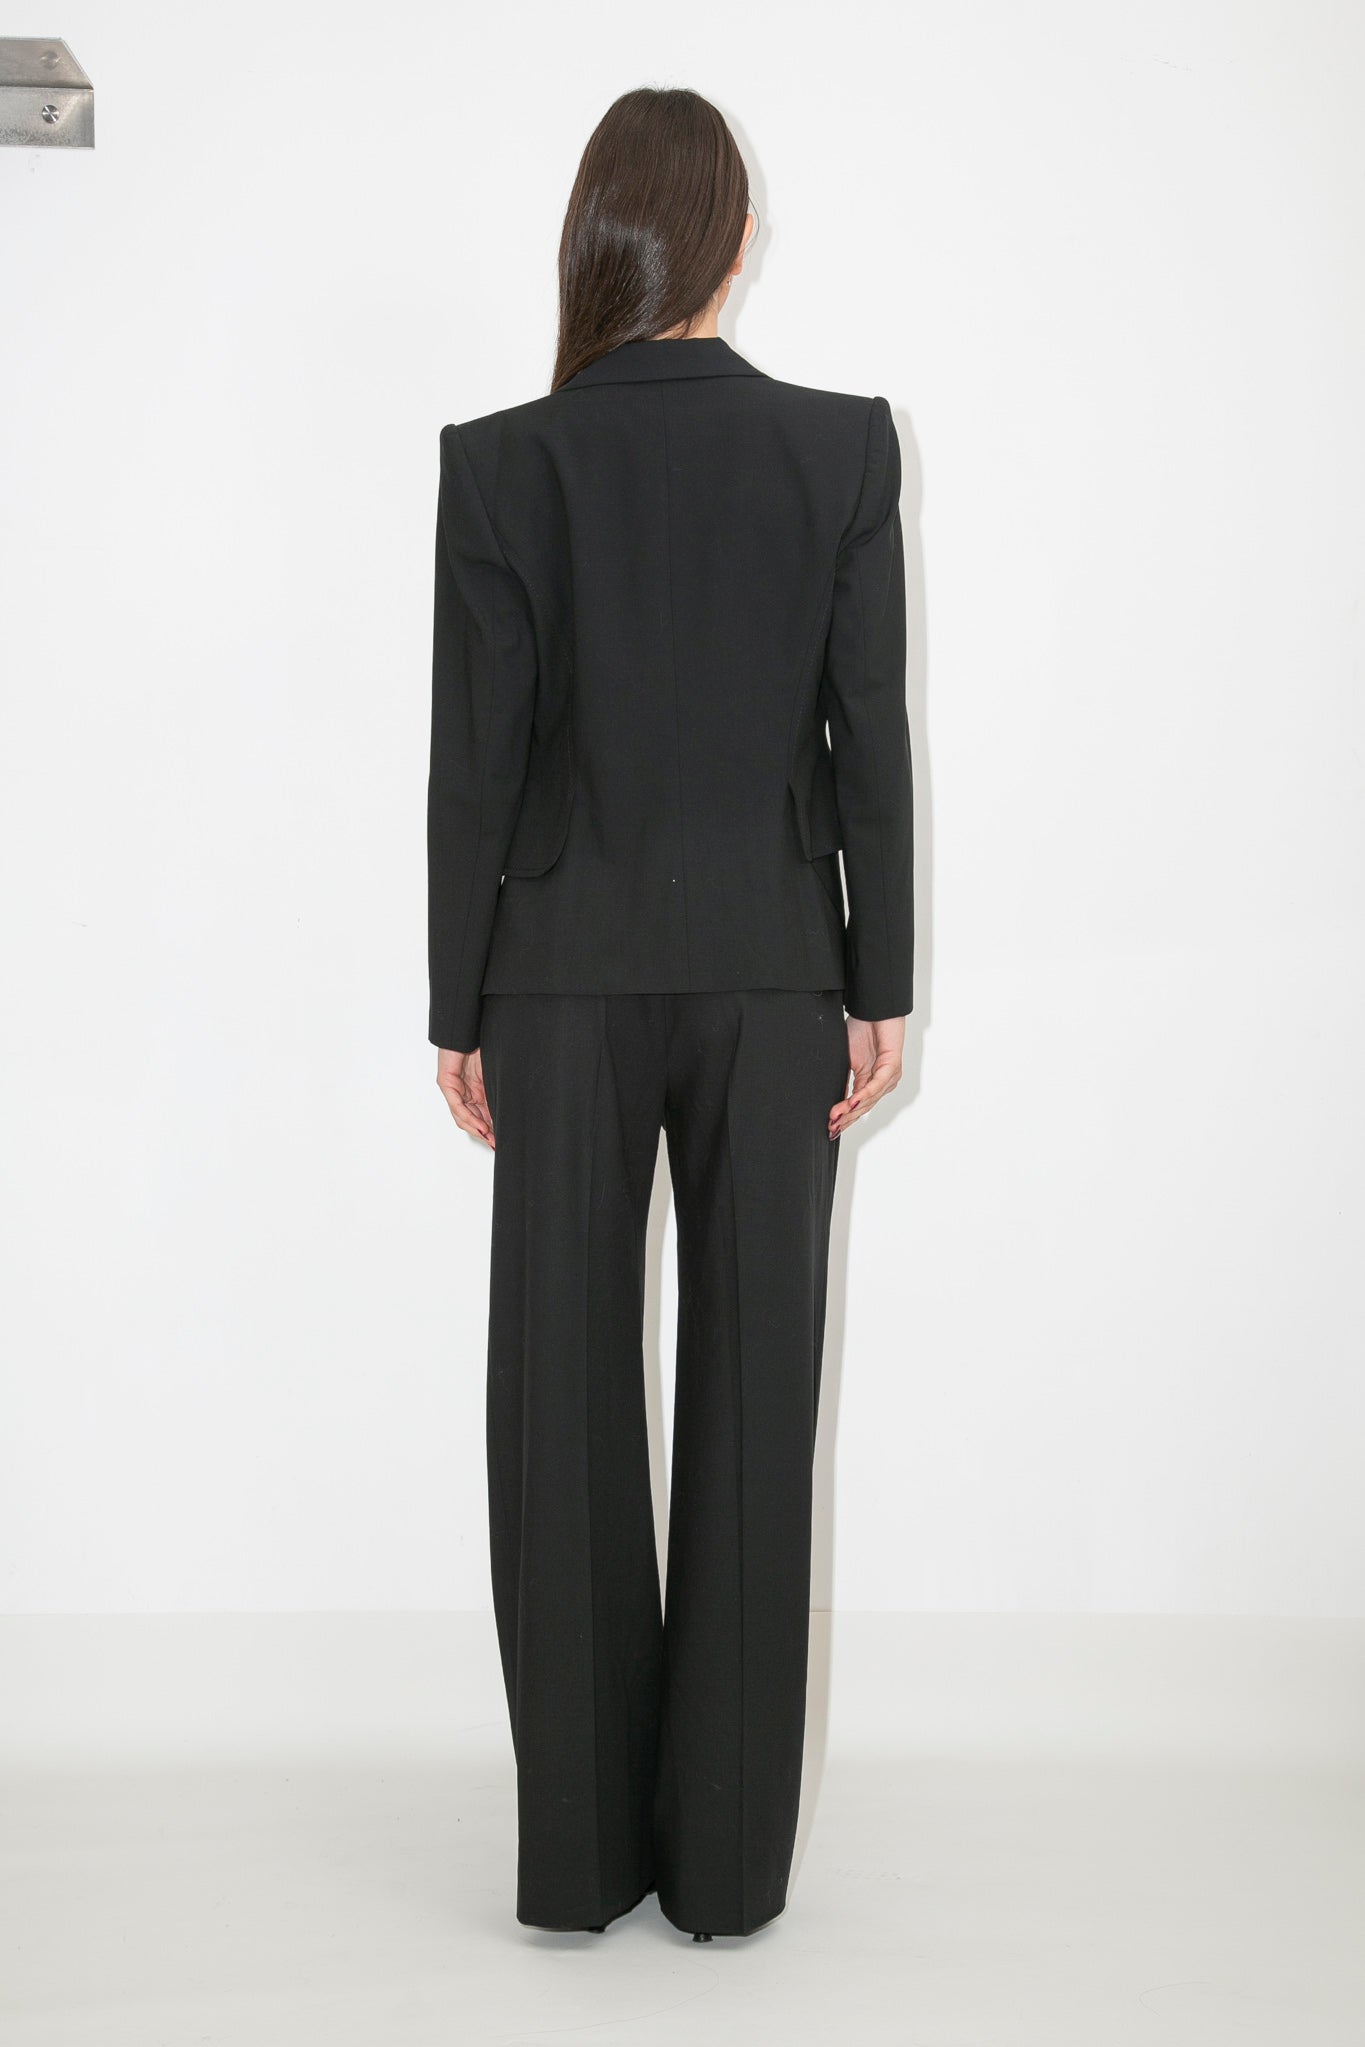 Gianfranco Ferre Structured Pant Suit